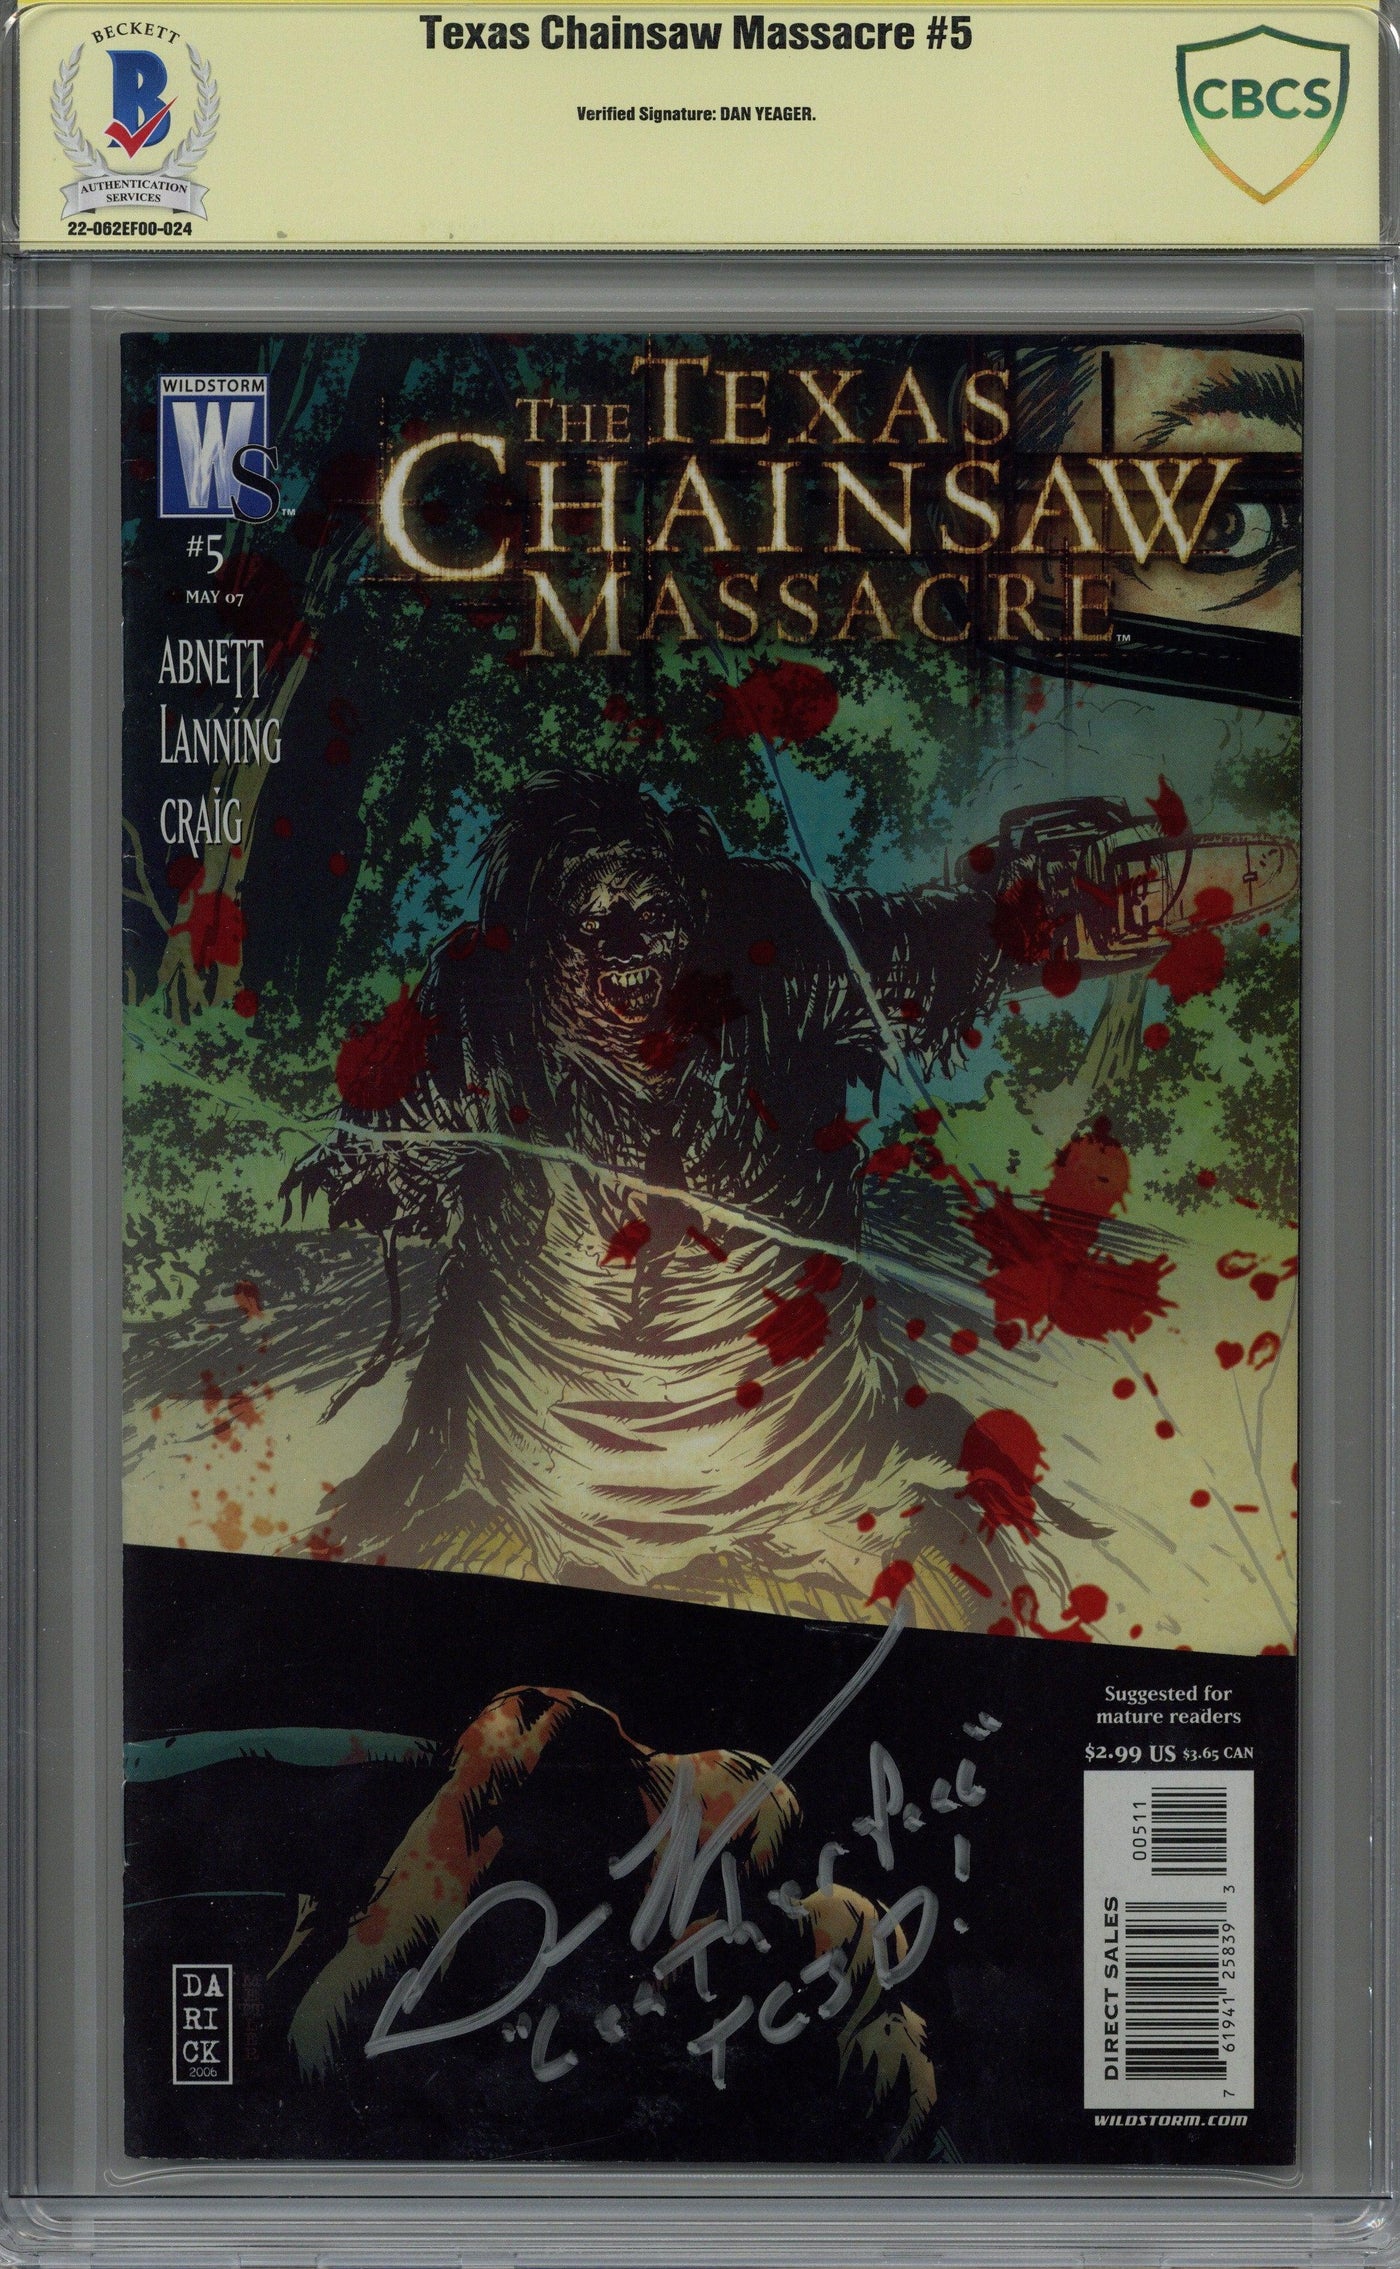 DAN YEAGER SIGNED The Texas Chainsaw Massacre Comic Book CBCS